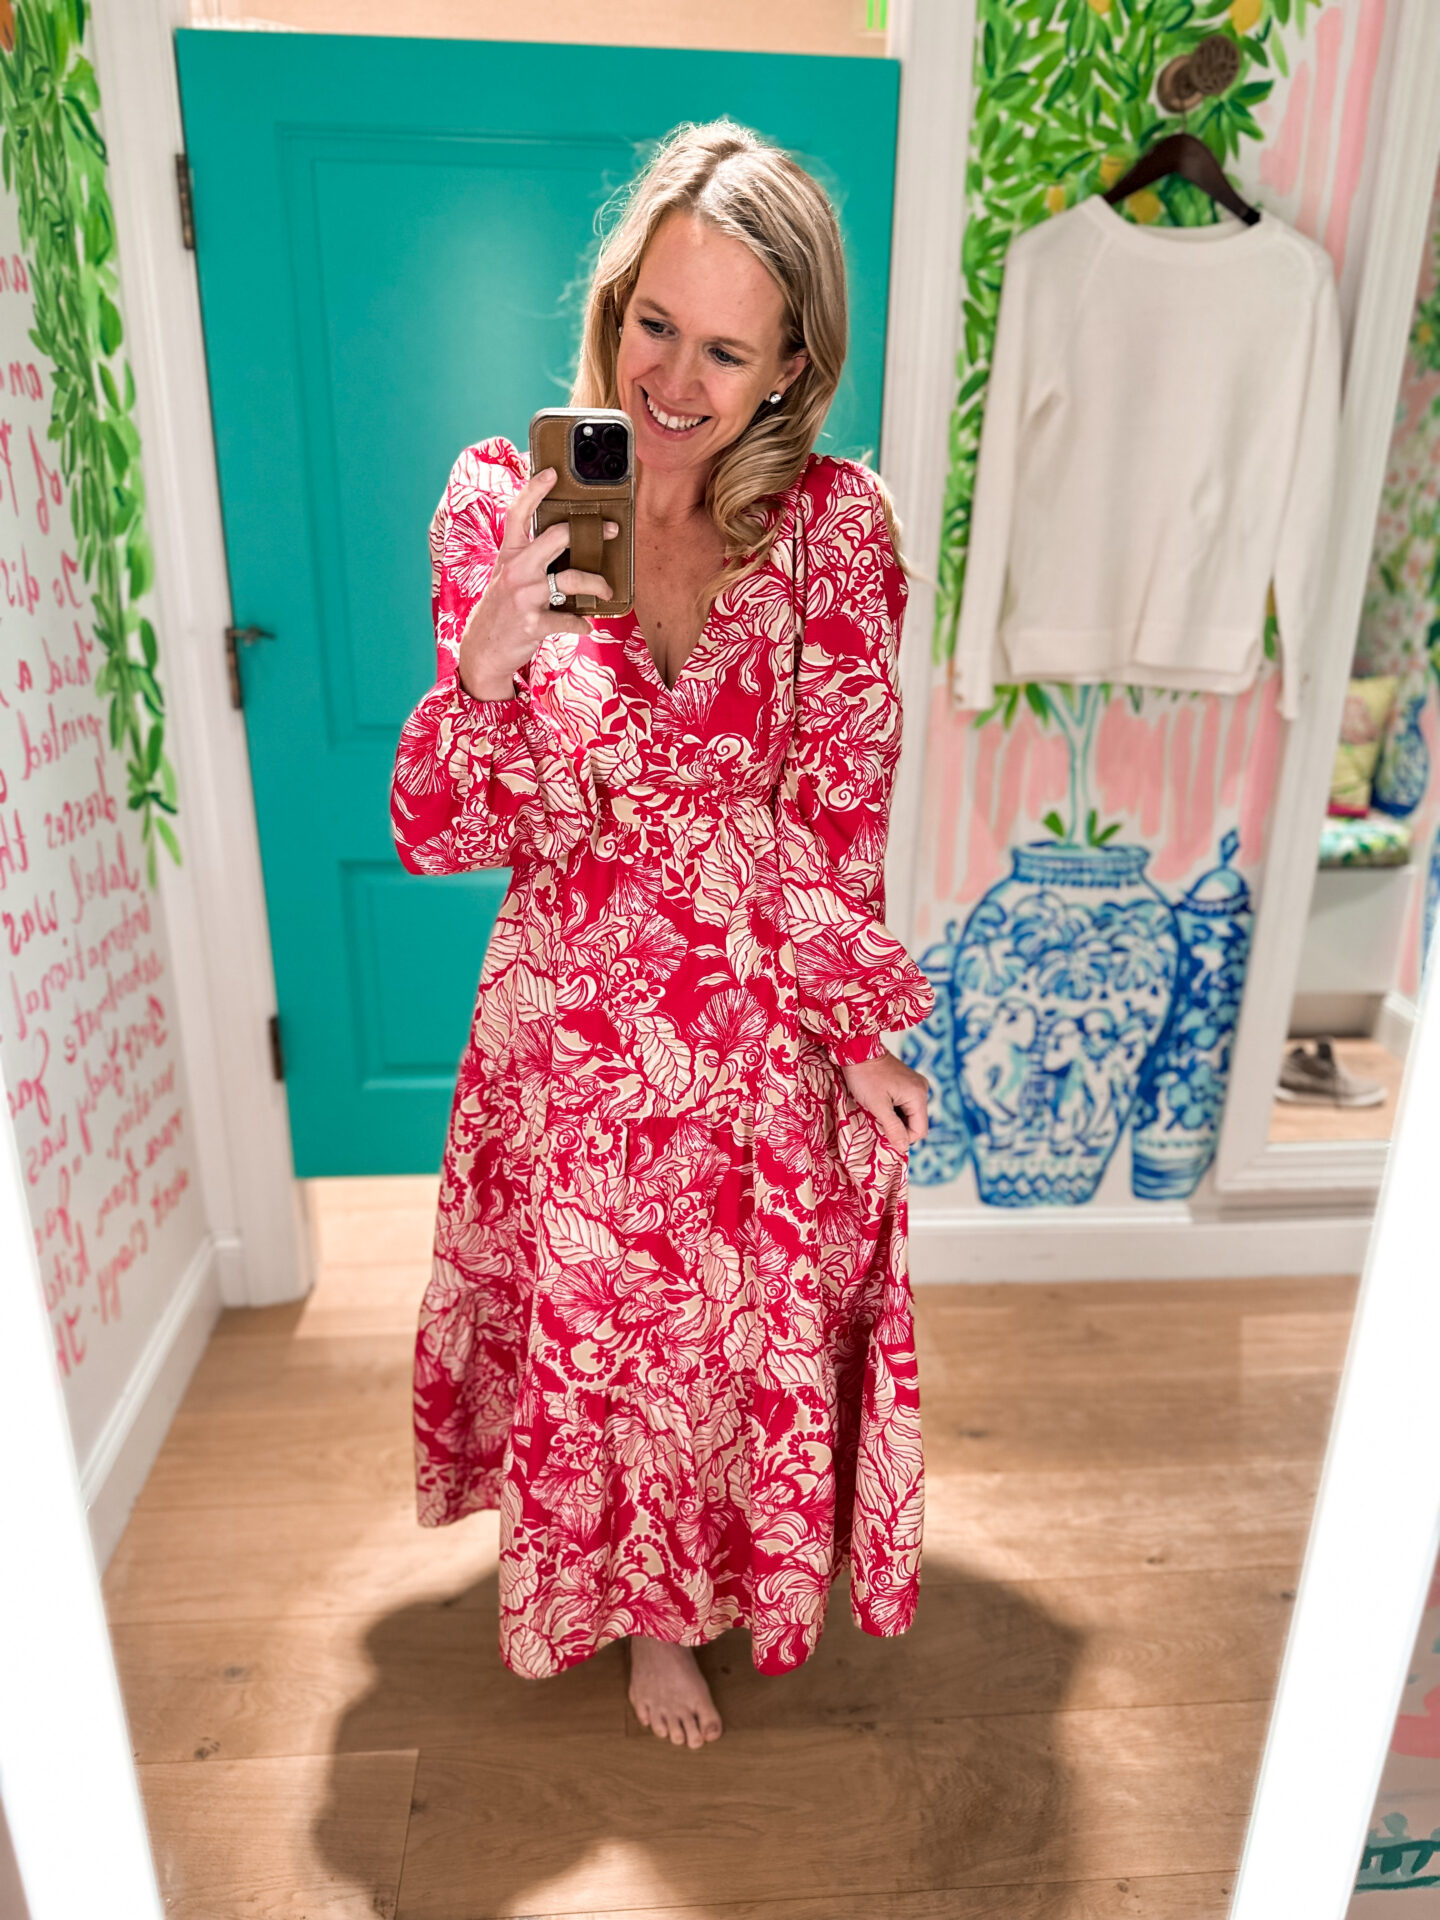 Winter 2023 Lilly Pulitzer Sale Guide - 3